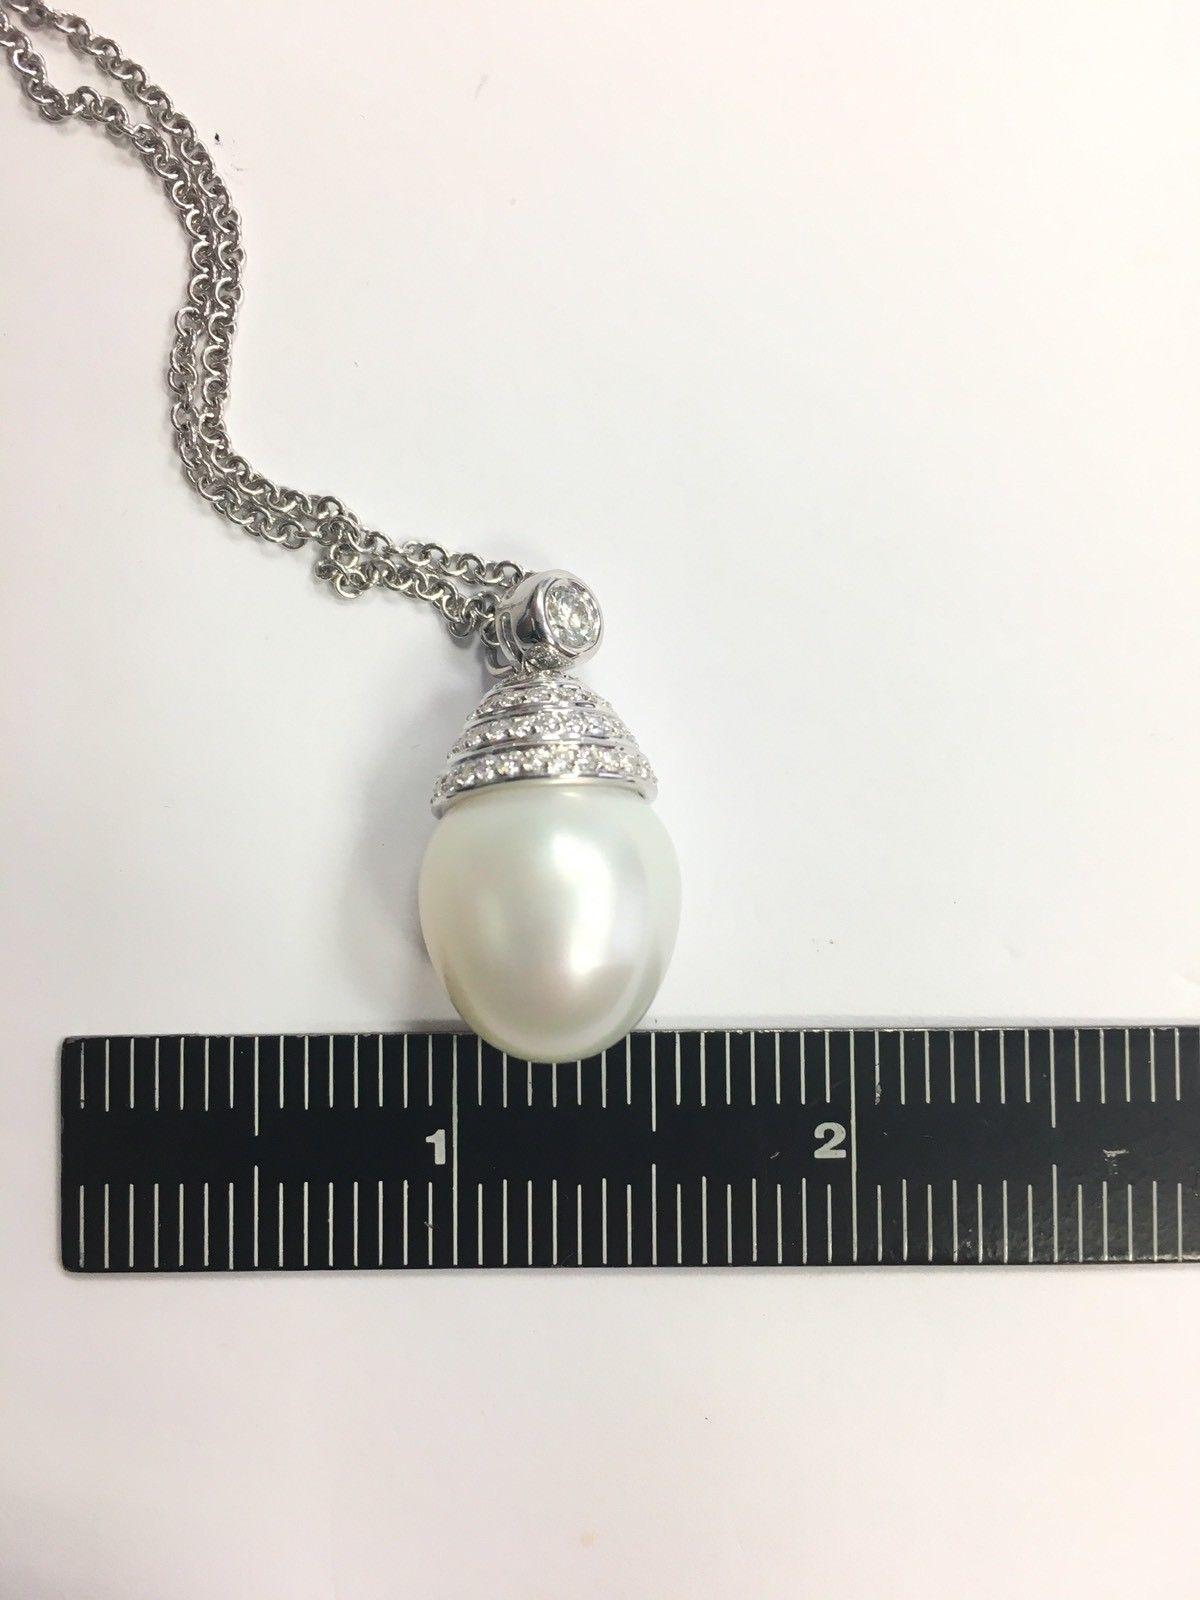 South Sea Pearl Gold Pendant 1.60 Carat Natural Colorless RBC Diamond Necklace 1